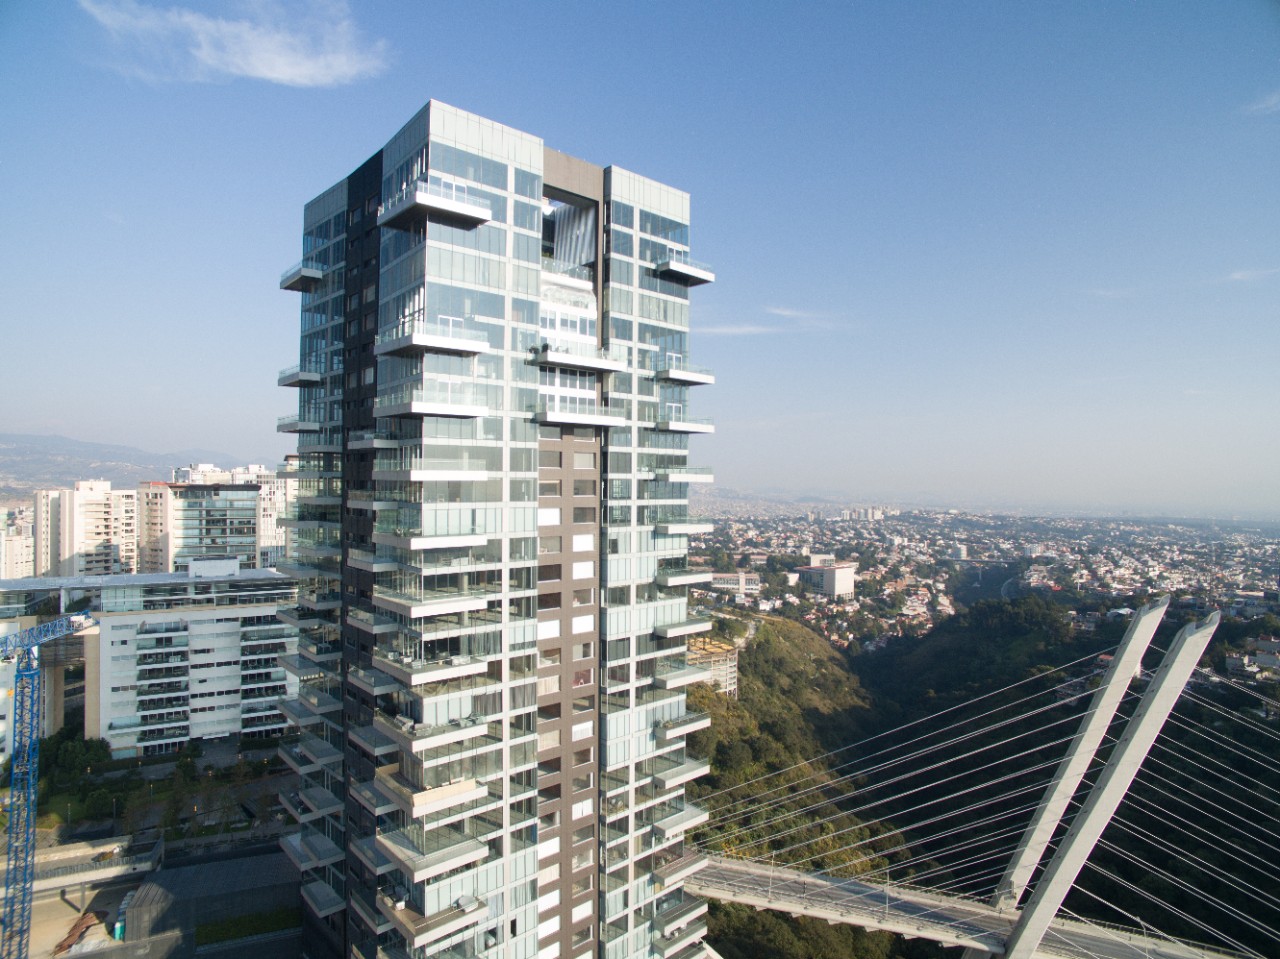 The Vidalta Lux Tower in Mexico City, Mexico by Serrano Monjaraz Architects features Guardian CrystalGray and Clear. Designed to strike a perfect balance between dynamic architecture, the natural landscape, and the freedom to adapt to the needs of its occupants, the glass-clad tower offers beautiful panoramic views of the Valley of Mexico from any direction.